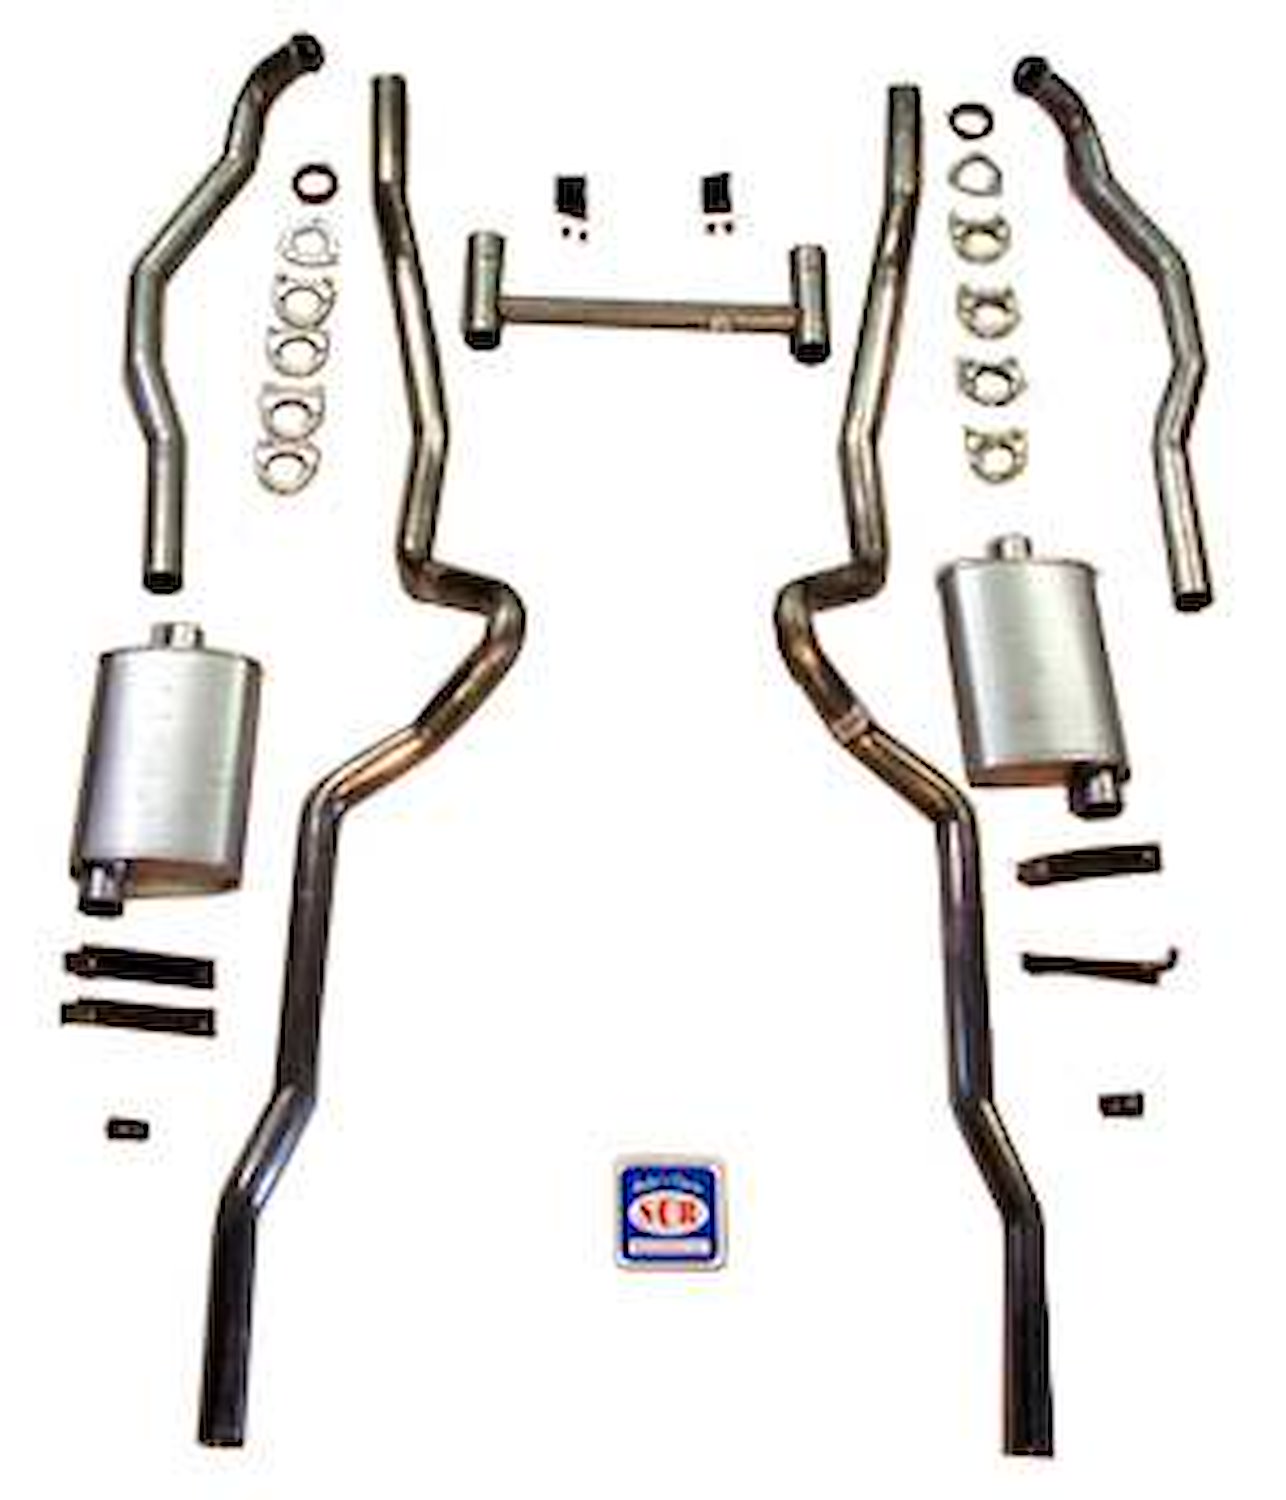 63031S 1955-1957 Chevrolet Full-Size 2-1/2 in. Dual Turbo Exhaust System, 304 Stainless Steel